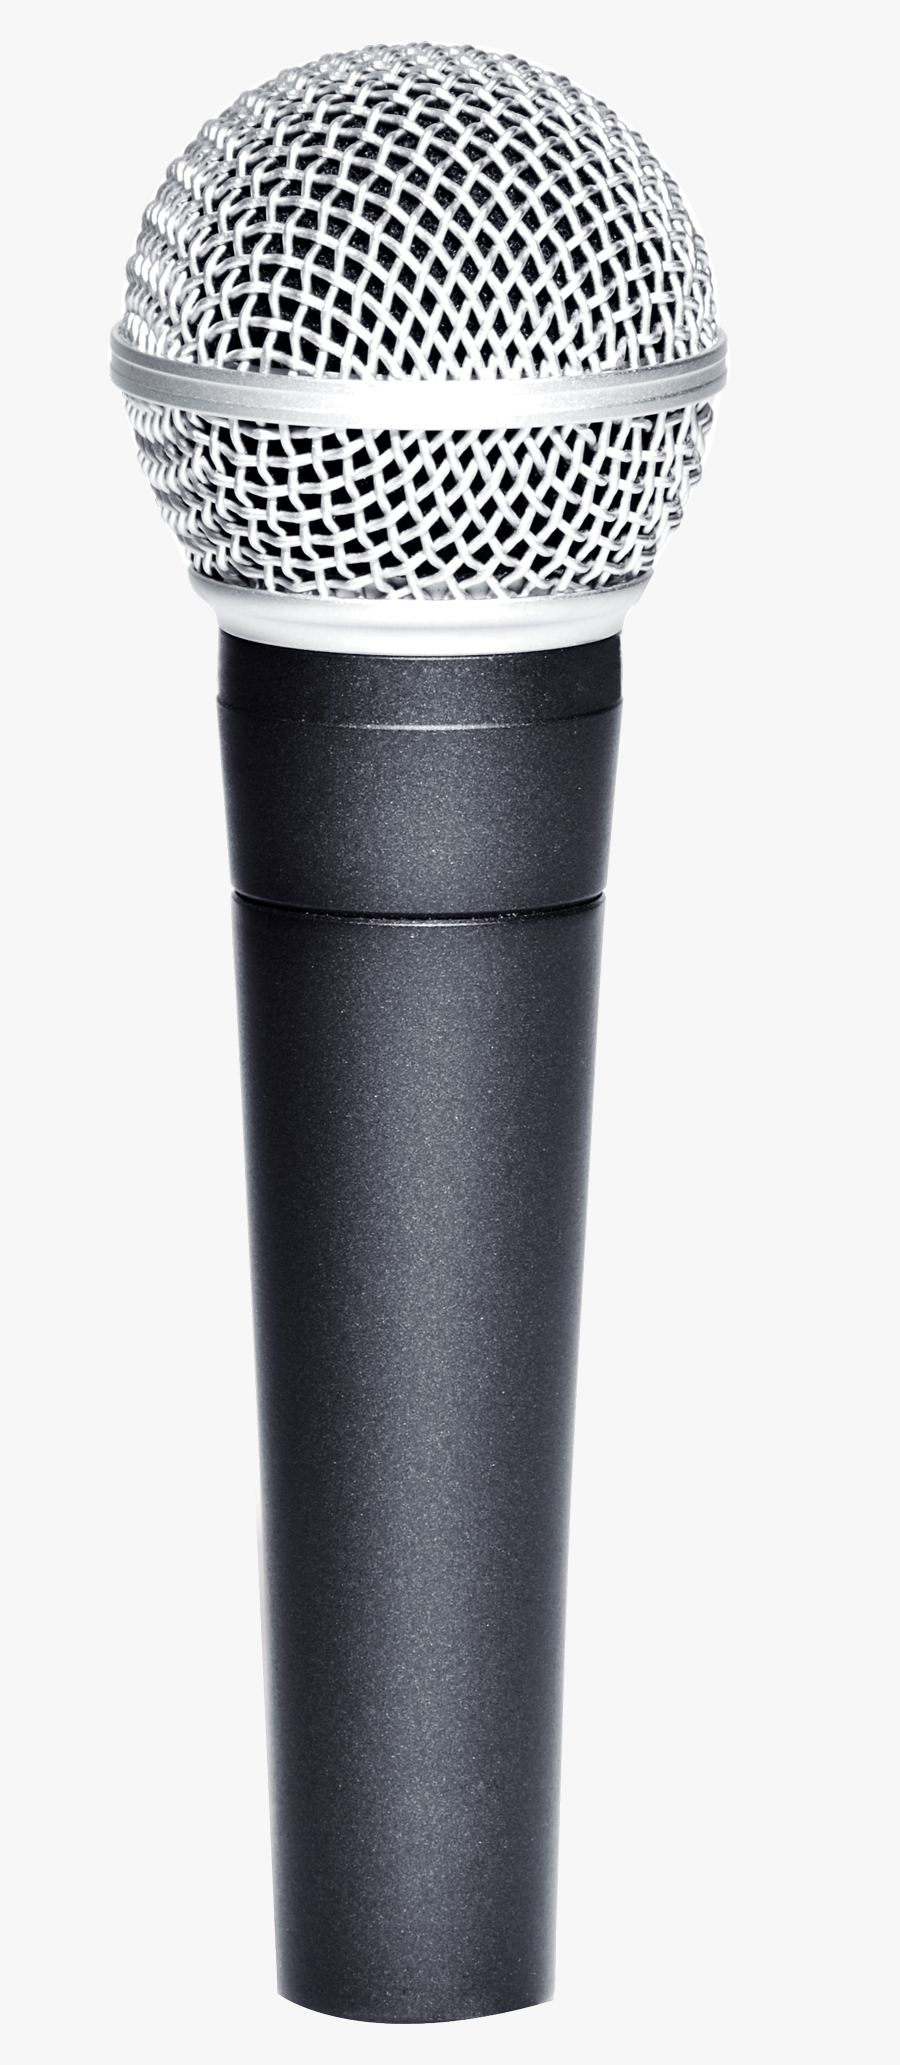 Microphone Png Image - Mic Png Hd , Free Transparent Clipart - ClipartKey